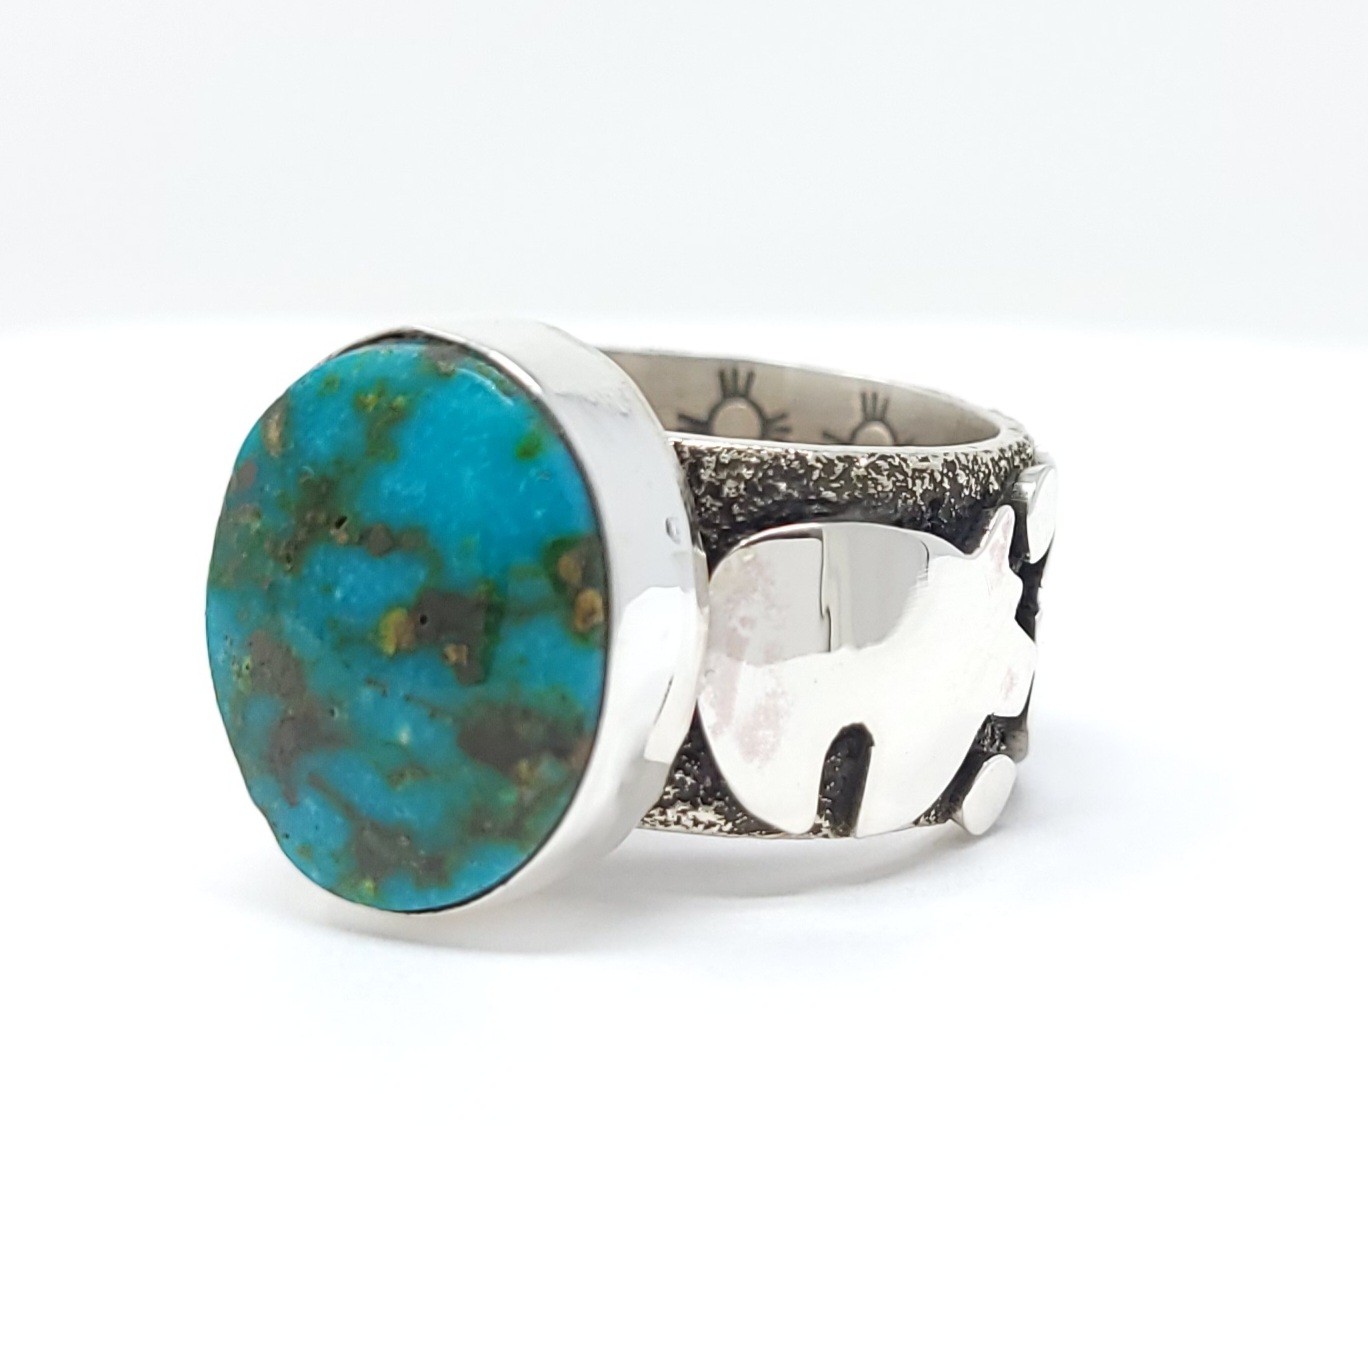 Alex Sanchez Navajo Sterling Silver Petroglyph Style Ring Sonoran Gold Turquoise